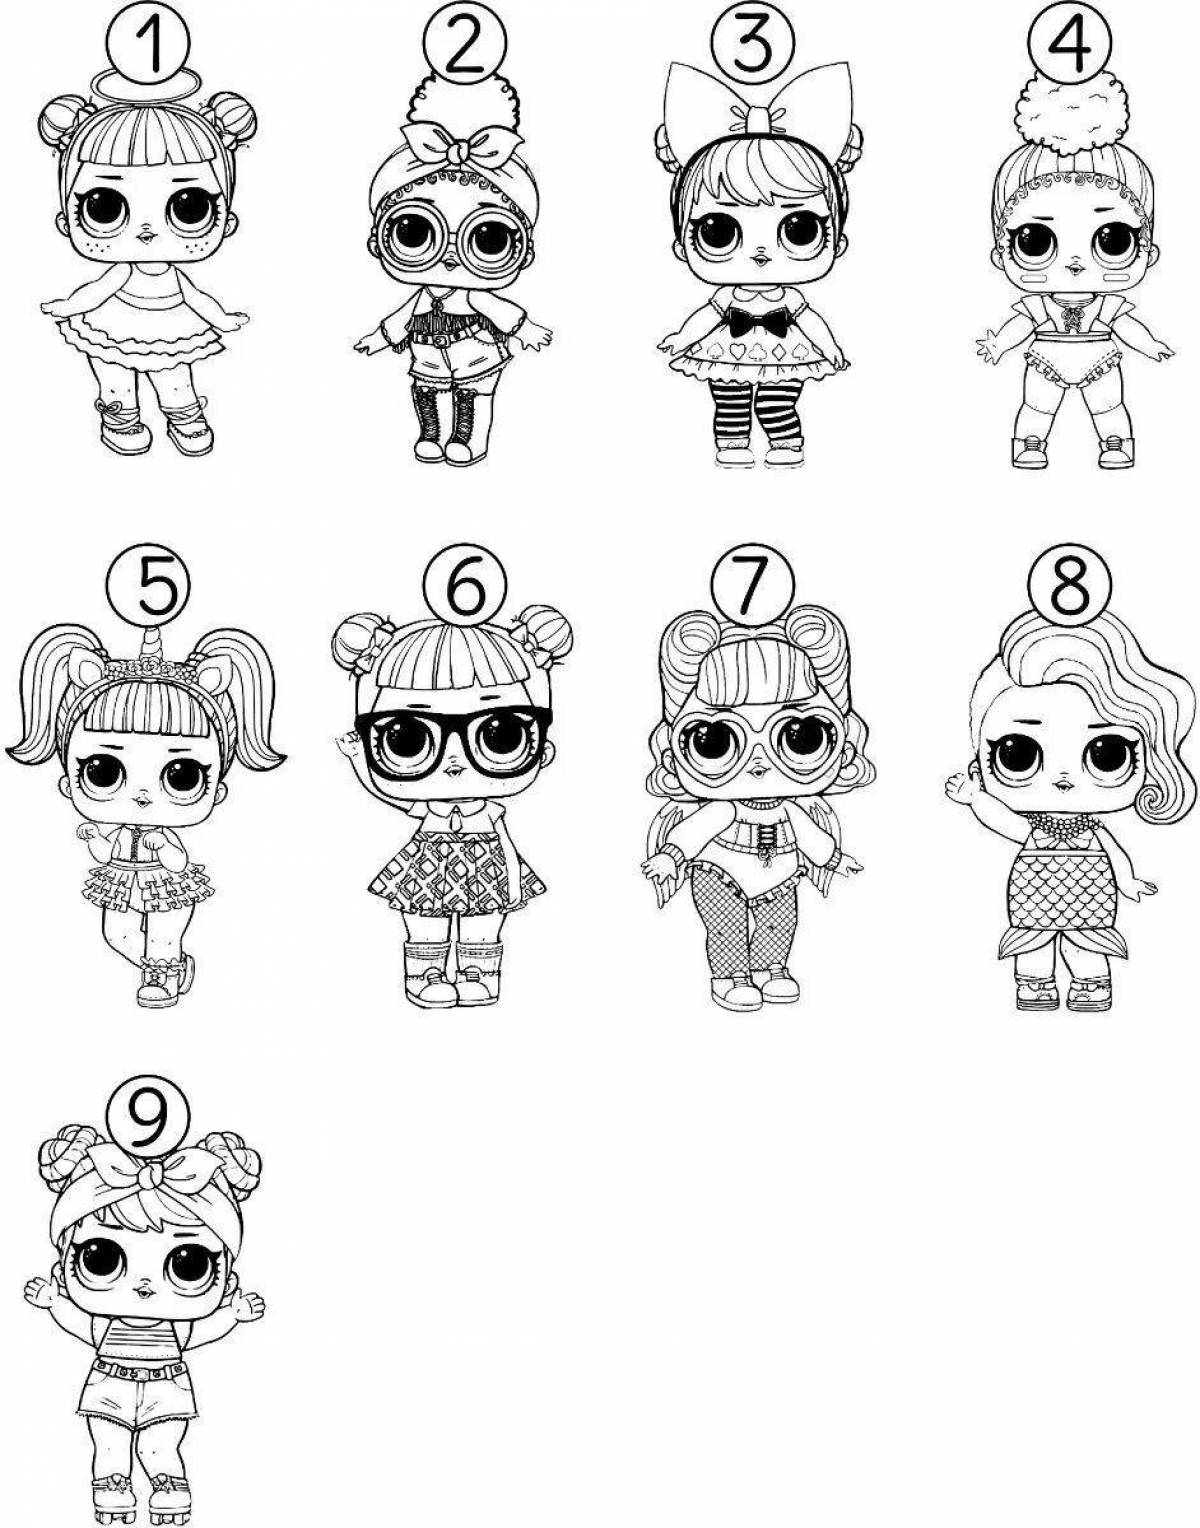 Exciting coloring of lol dolls